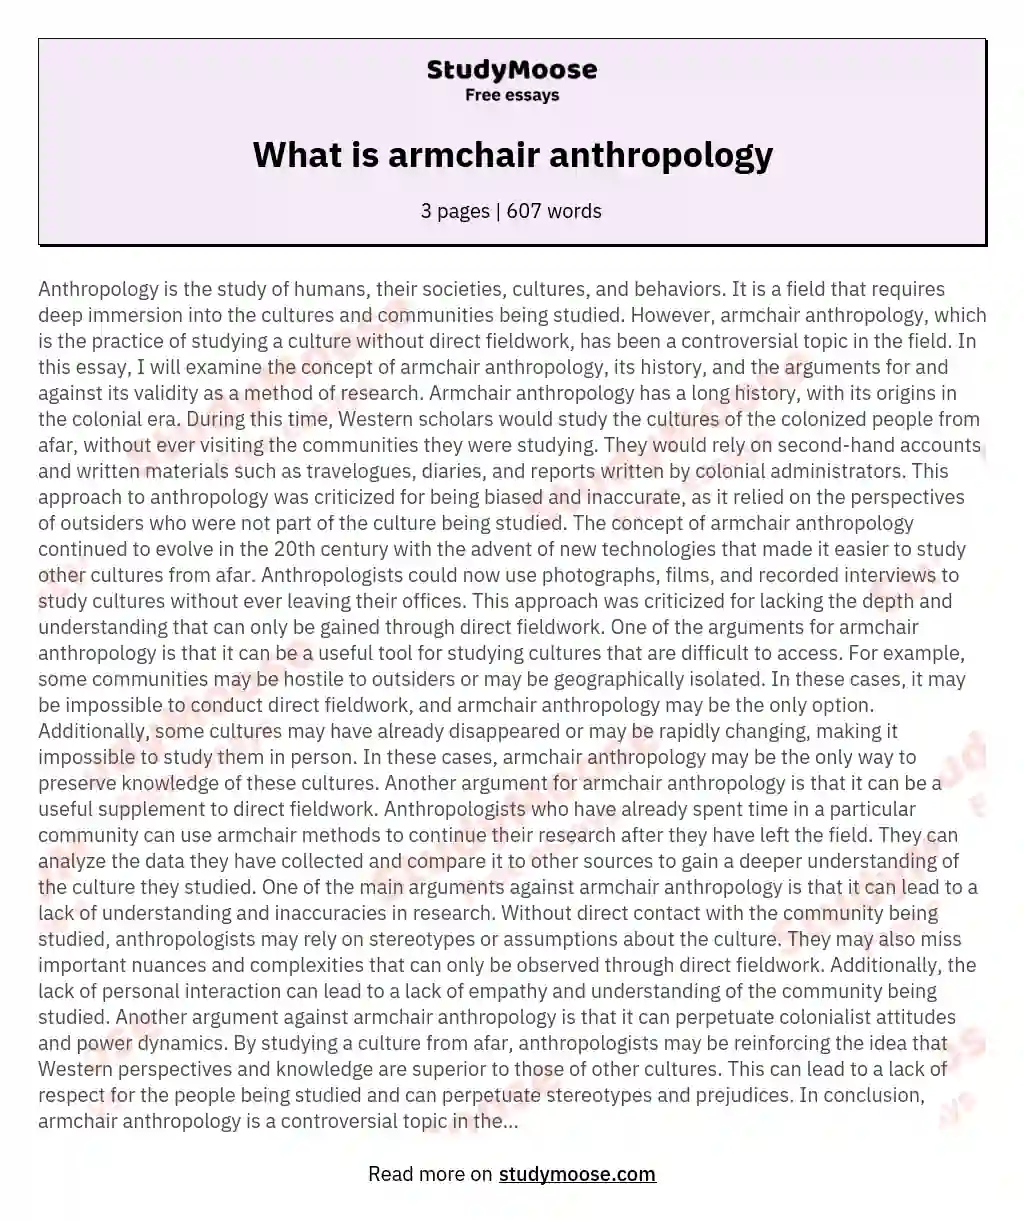 What is armchair anthropology essay